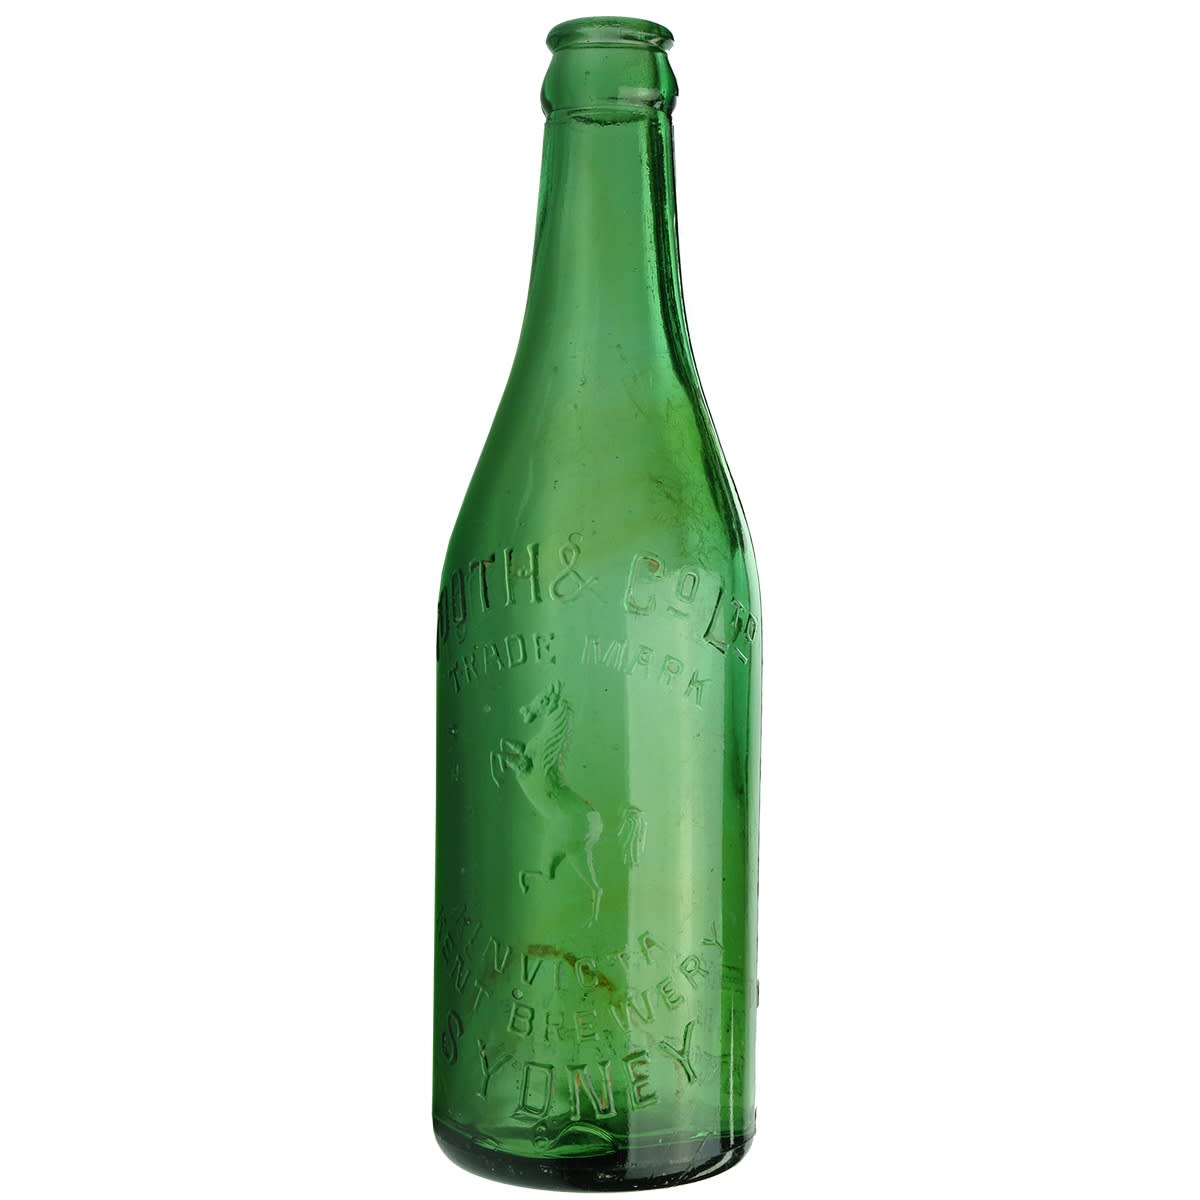 Crown Seal. Tooth & Co Ltd, Sydney. Invicta Kent Brewery. Green. 10 oz. (New South Wales)